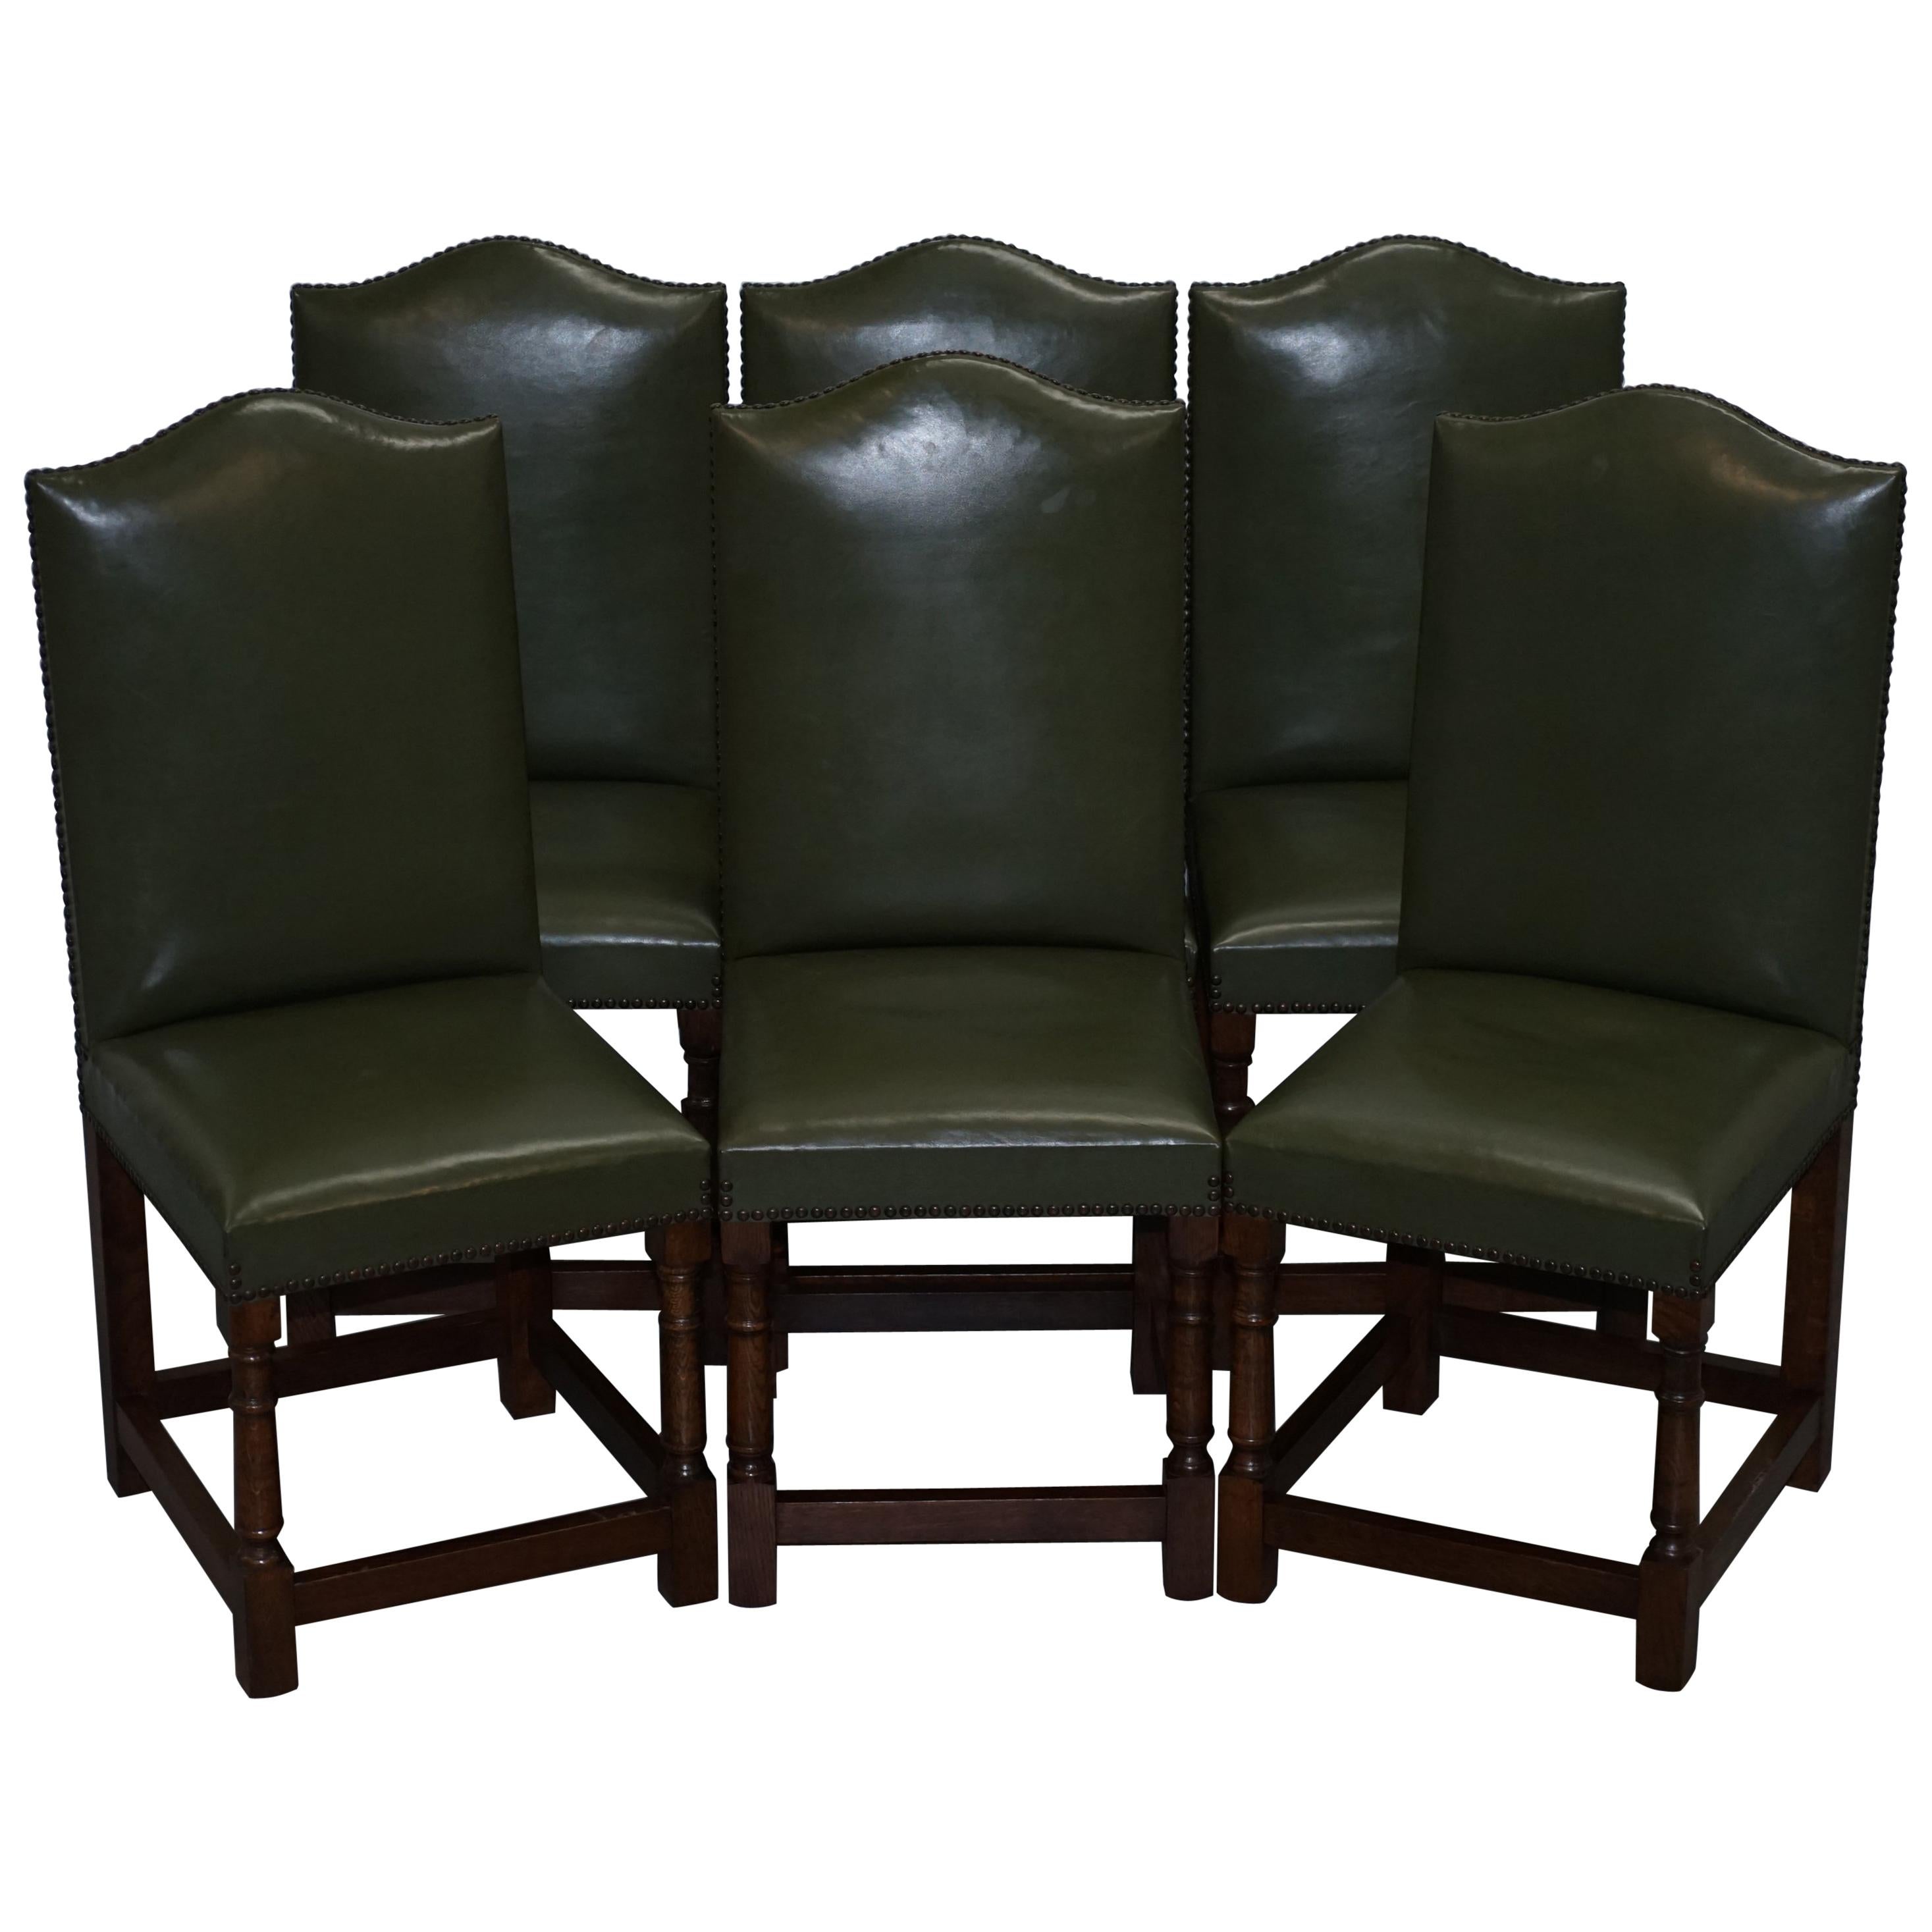 Nice Set of Six Edwardian English Oak and Green Leather High Back Dining Chairs